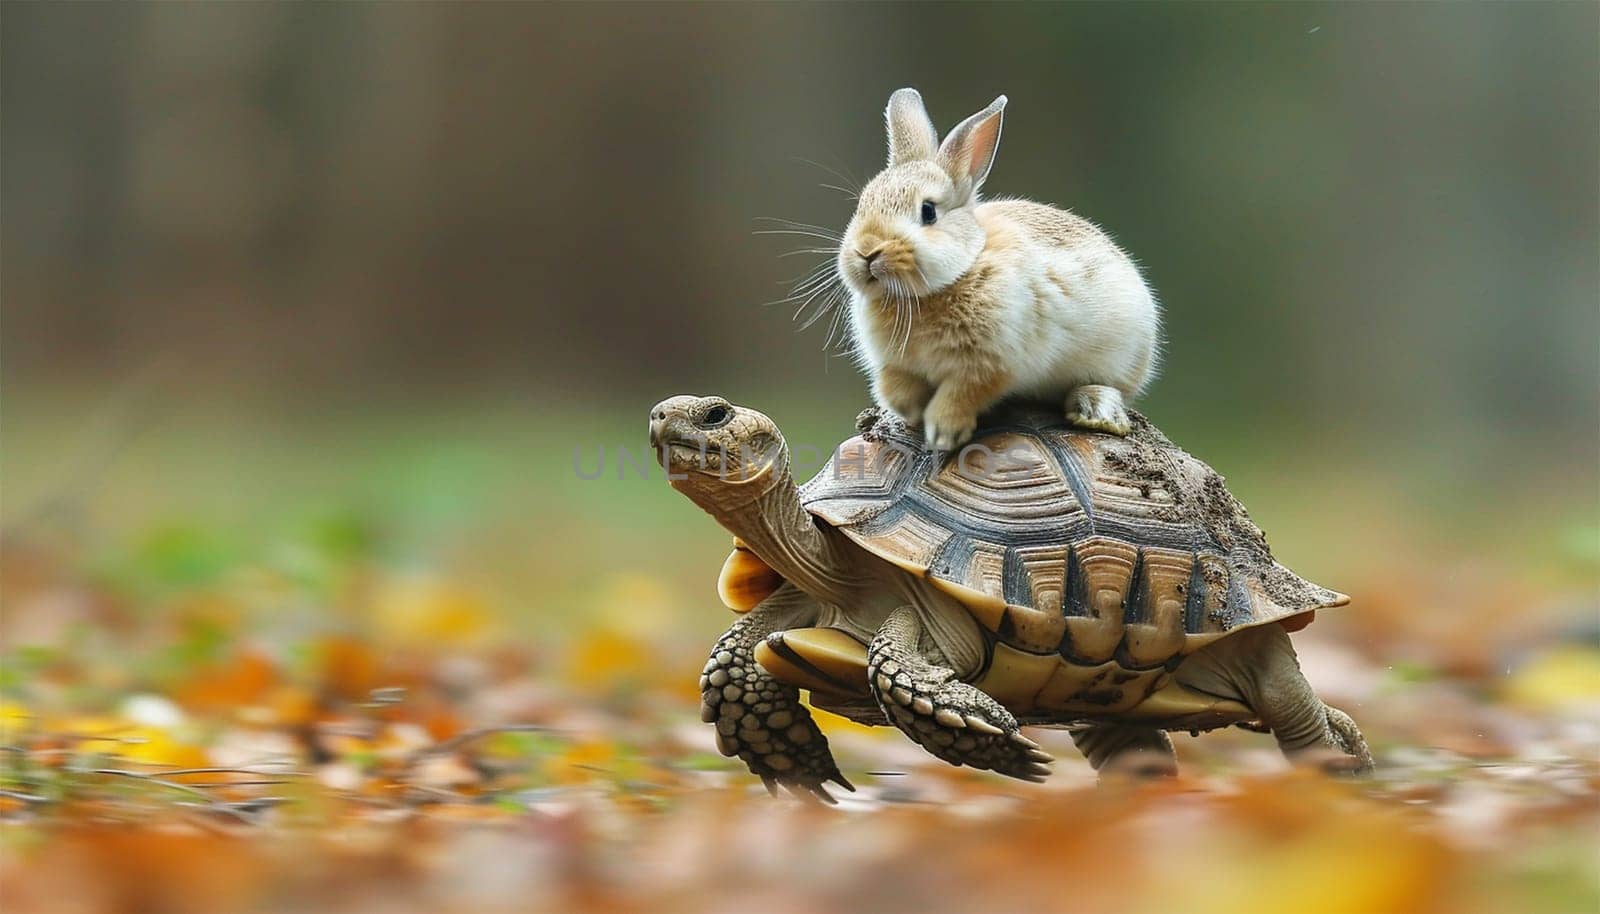 Rabbit sits on running turtle. while the tortoise runs slow the rabbit's fast run race the trees woodland fairy tale book the hare and the tortoise struggle story race Copy space by Annebel146